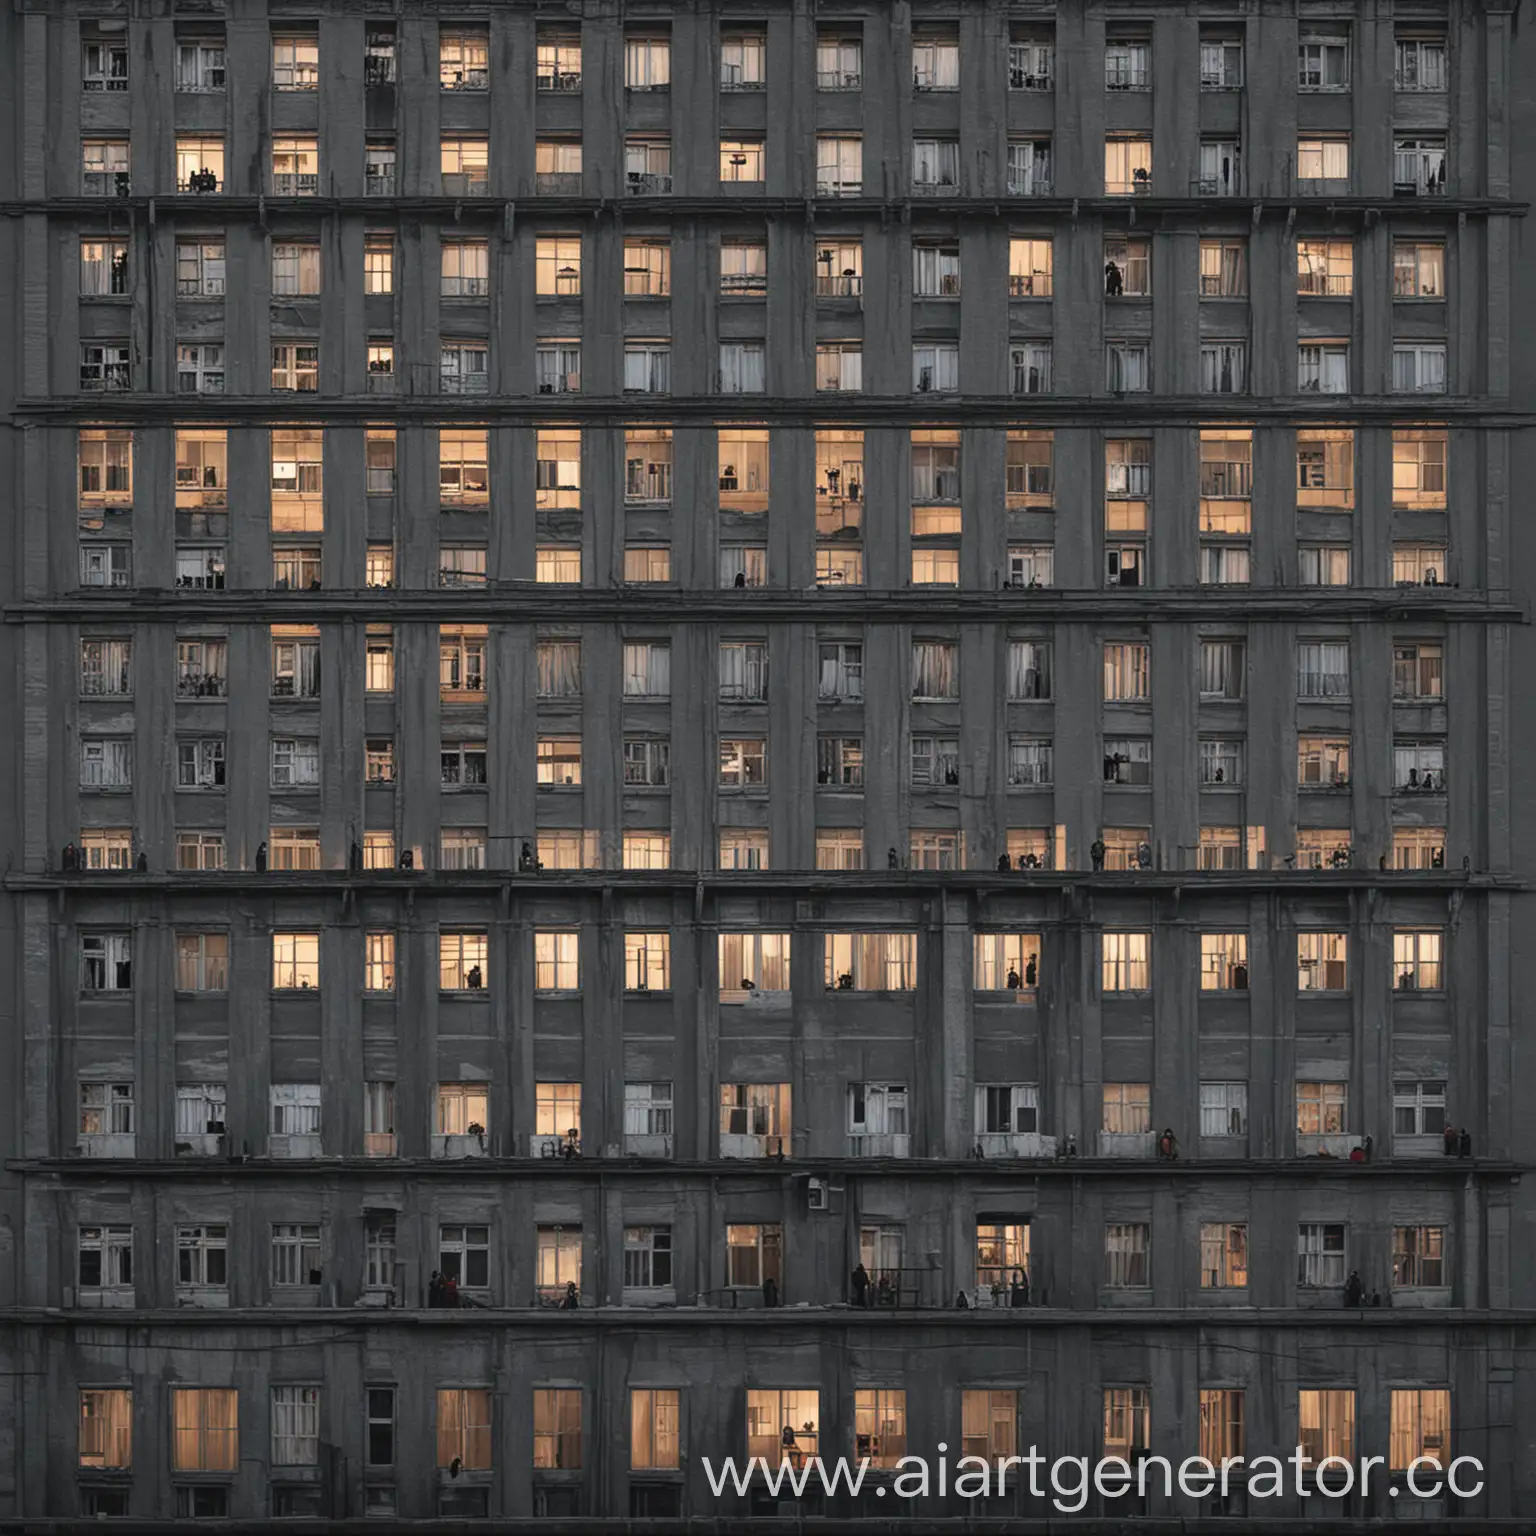 Evening-in-Soviet-Panel-Buildings-Pixel-Art-Cityscape-with-Silhouettes